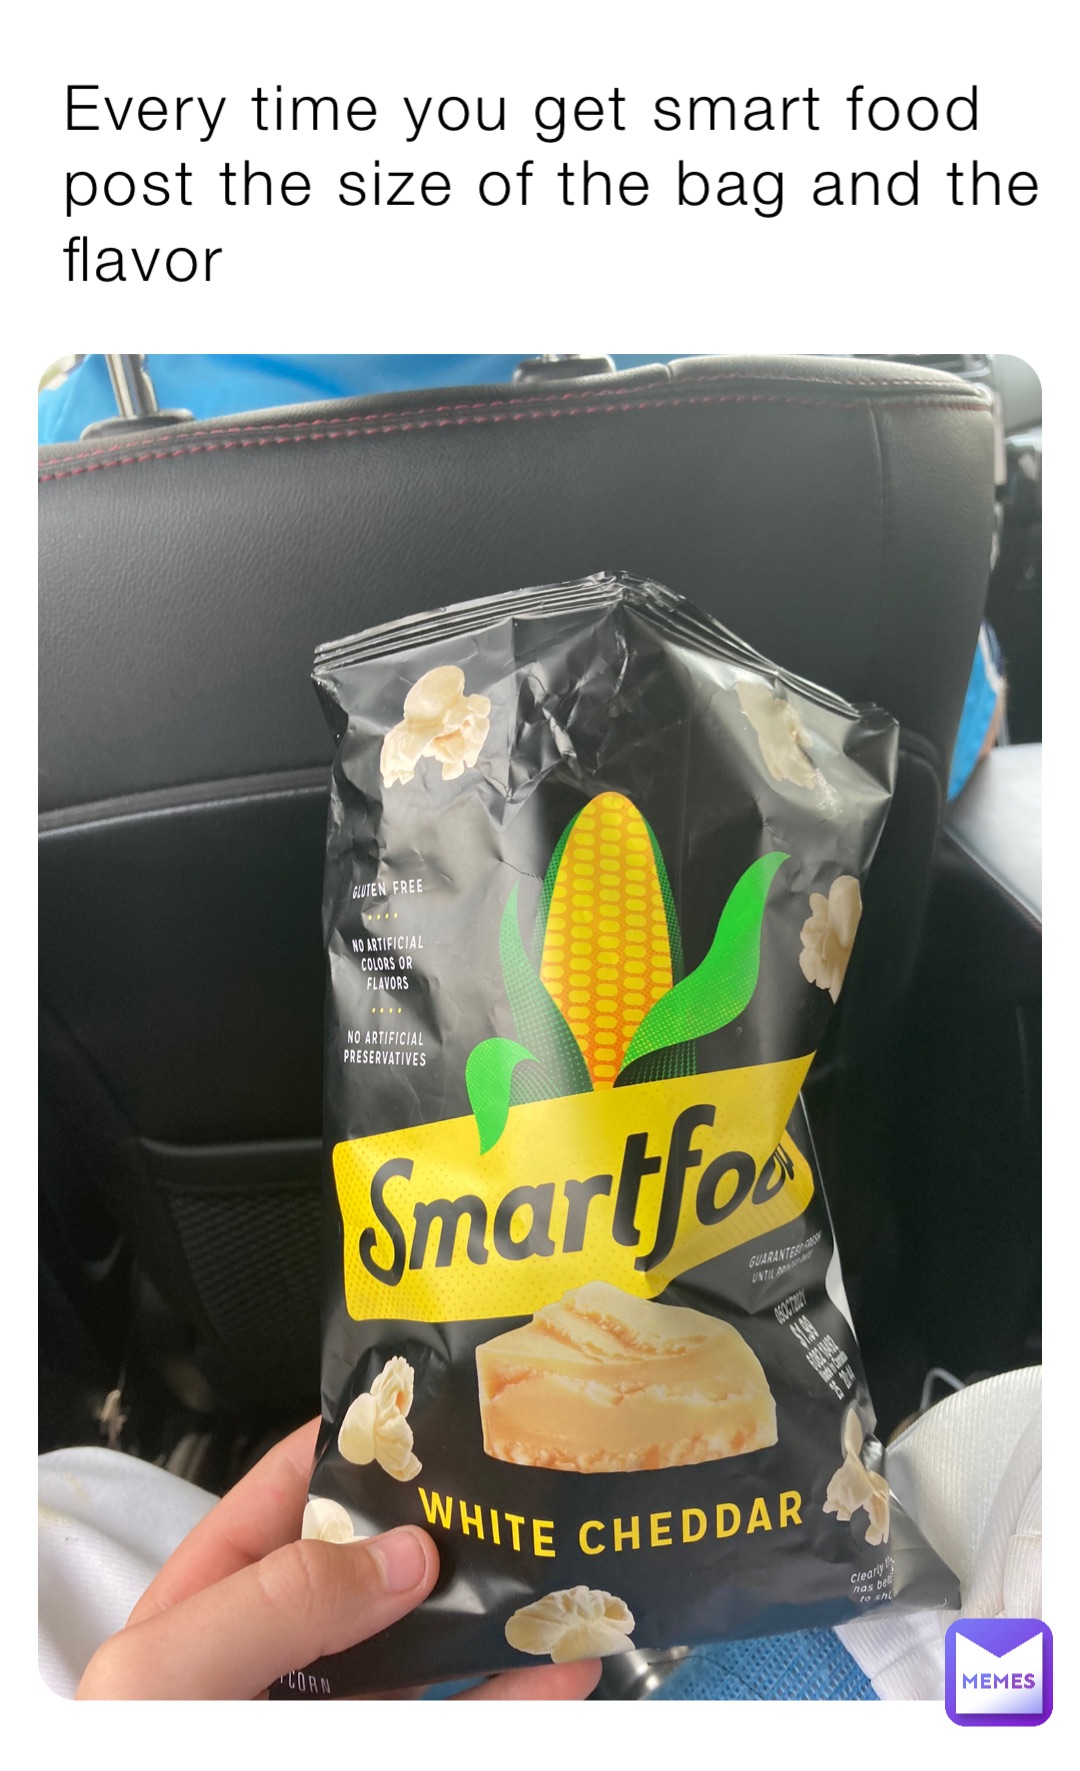 Every time you get smart food post the size of the bag and the flavor